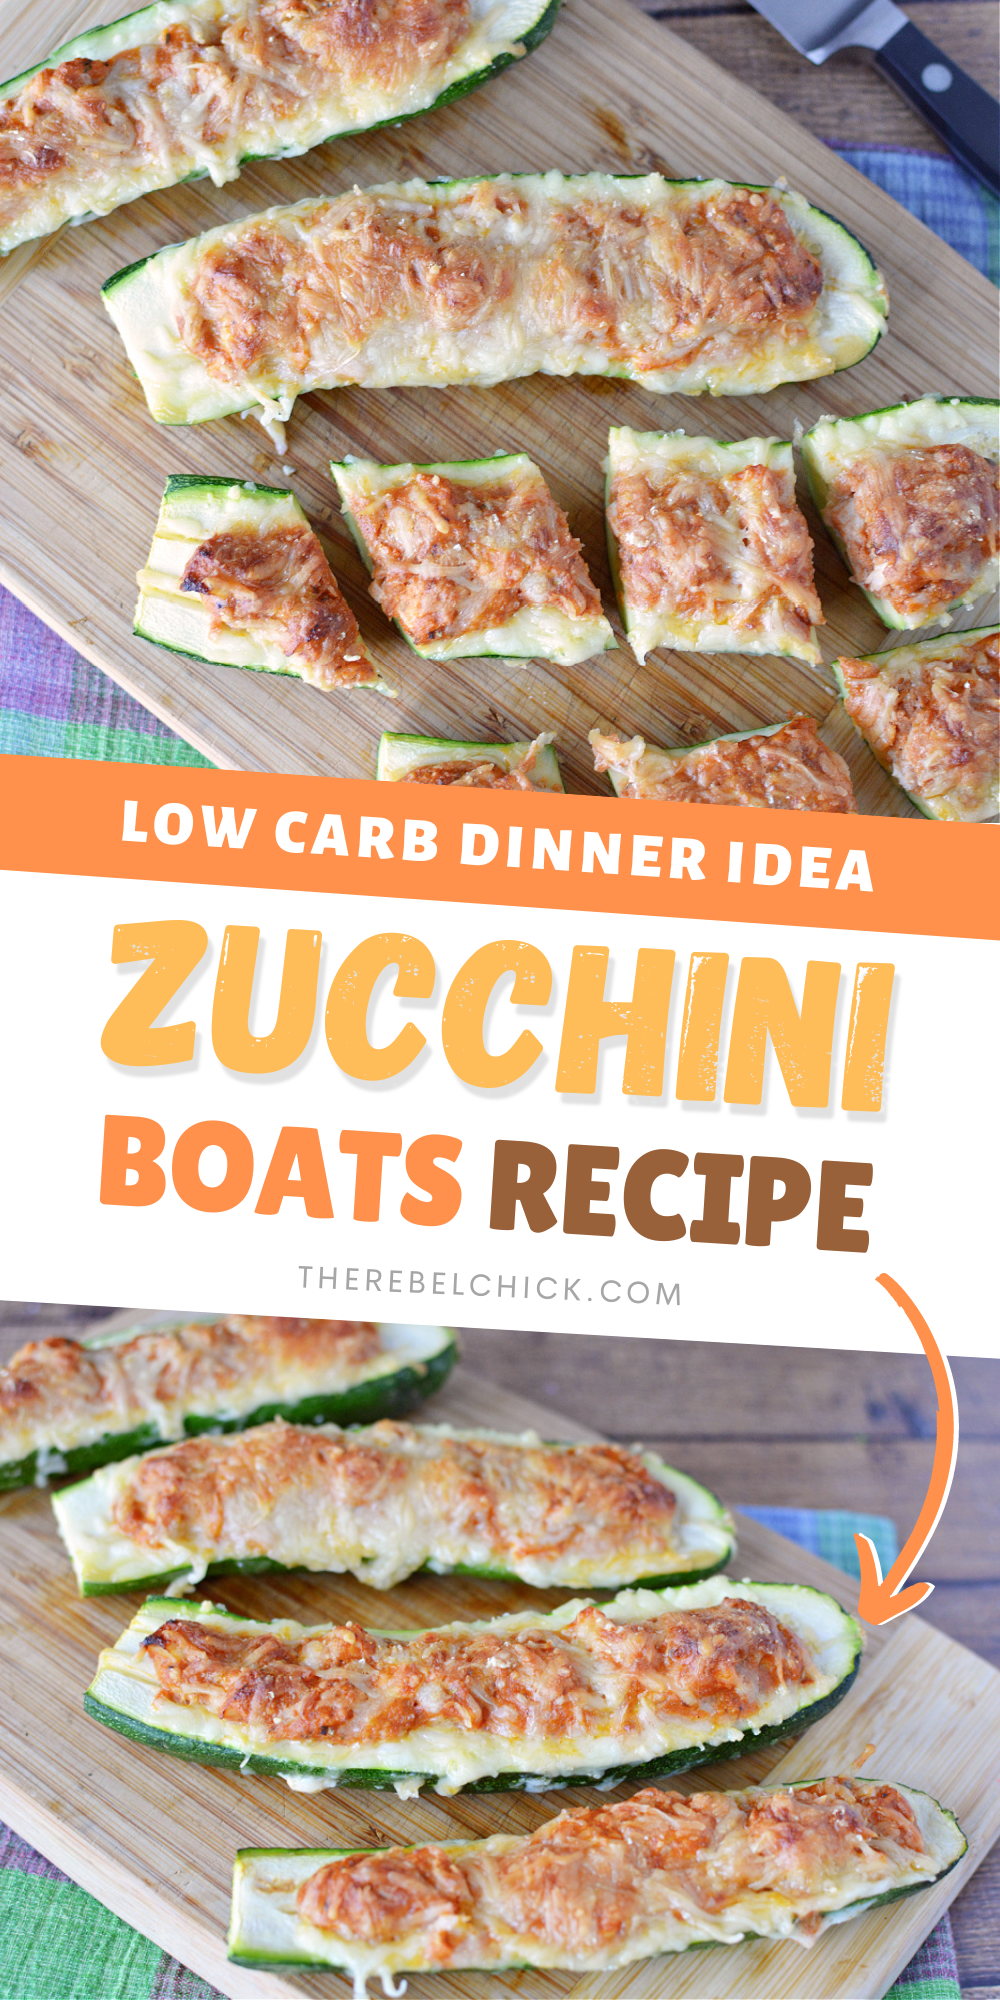 Super Easy Low Carb Dinner Idea with Zucchini